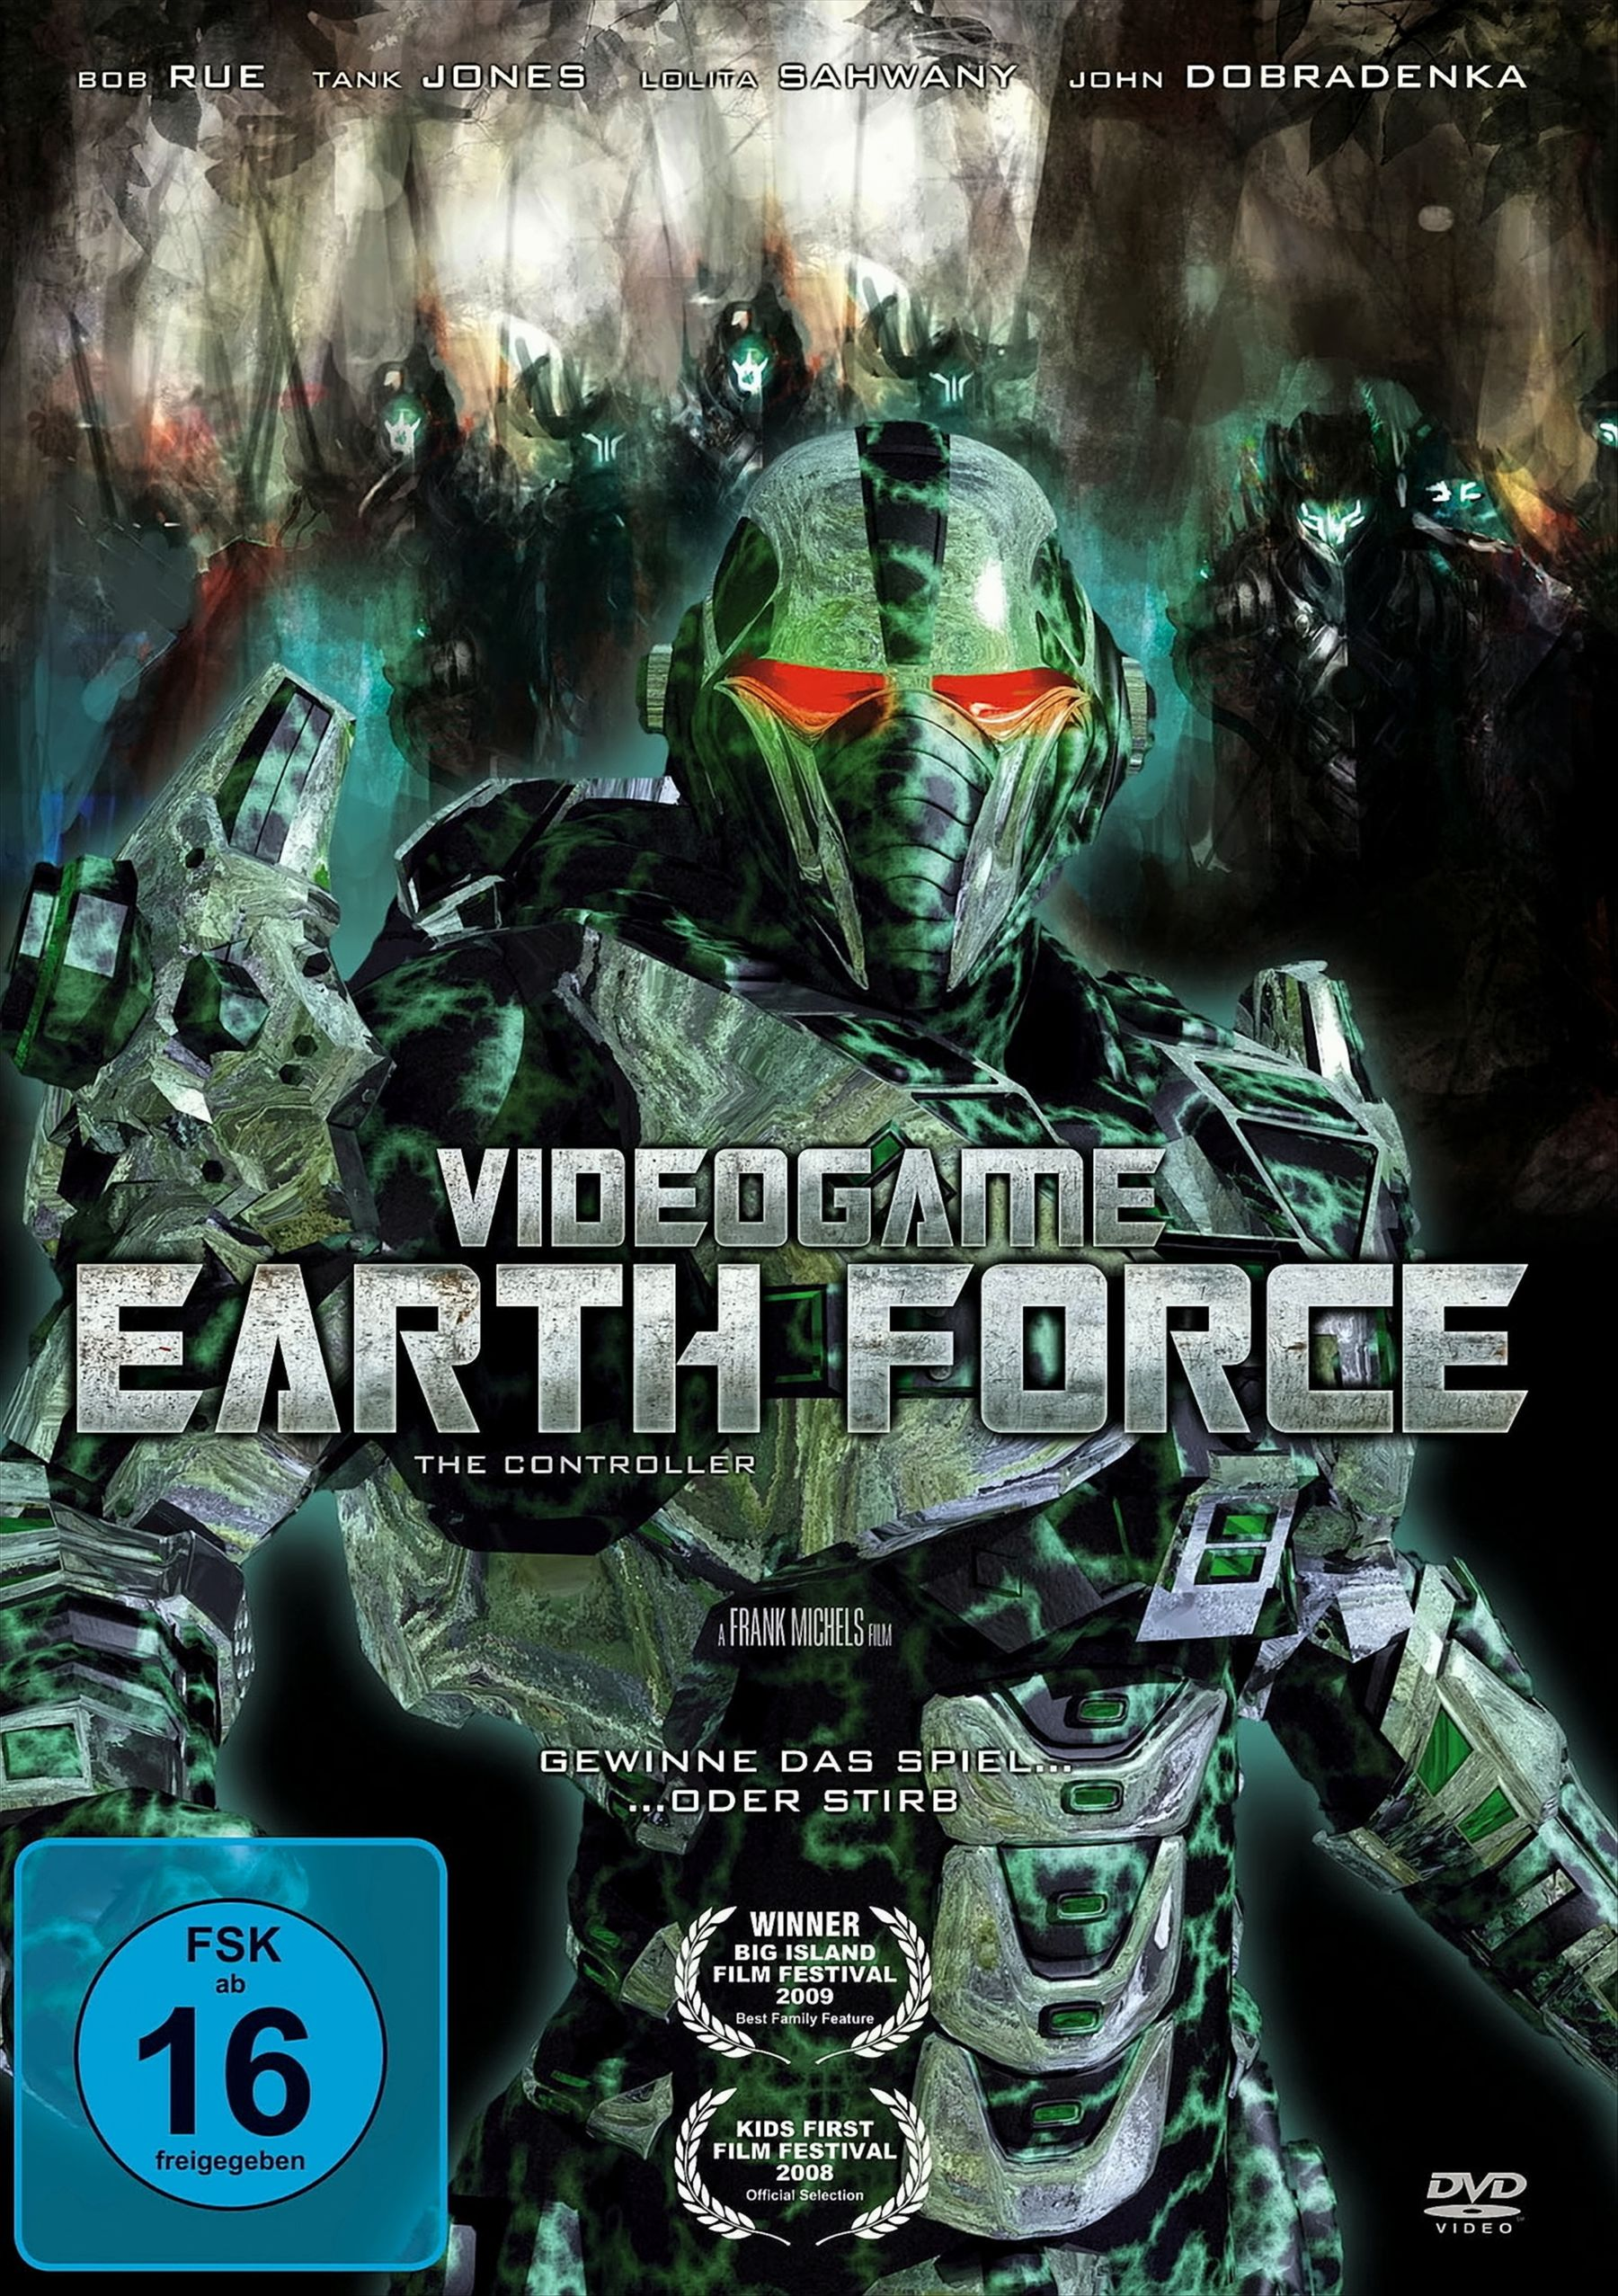 DVD Force Earth Videogame